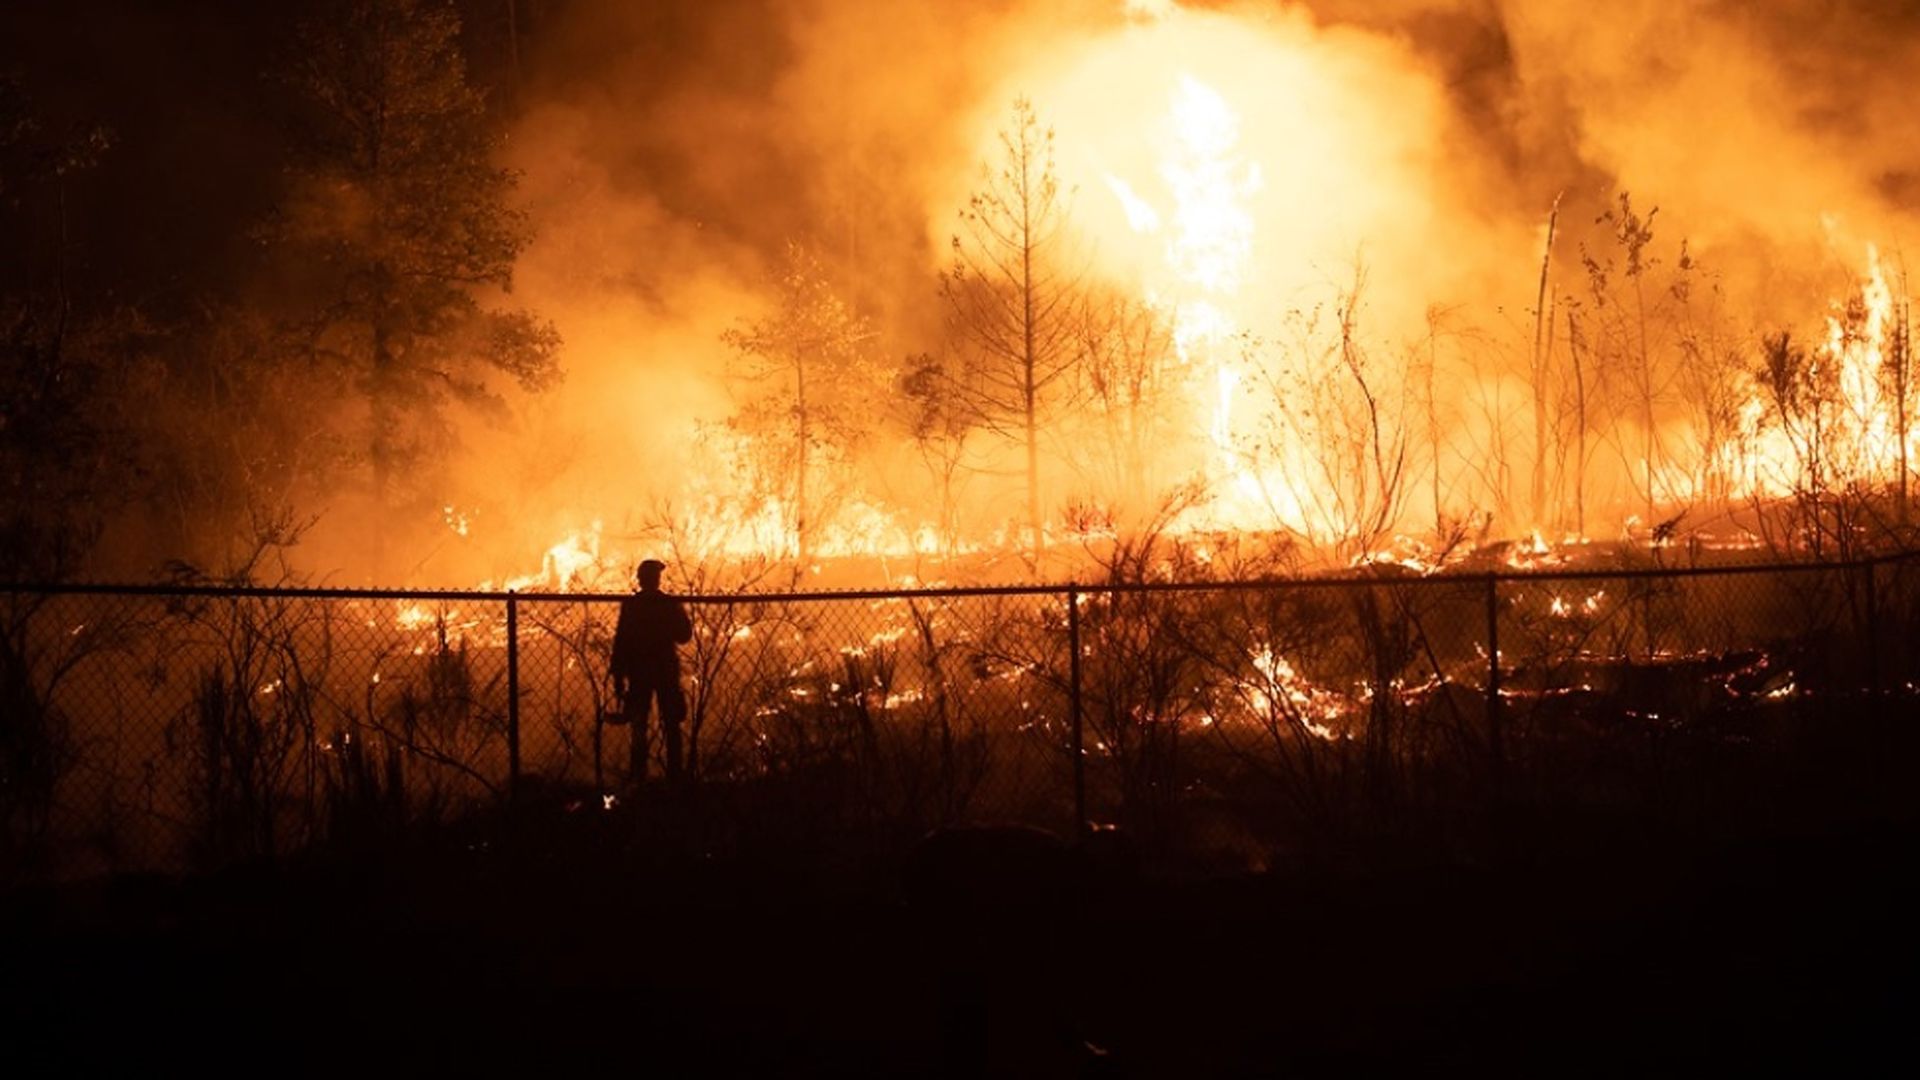 A person surrounded by fire in Oregon looks at a burning field.